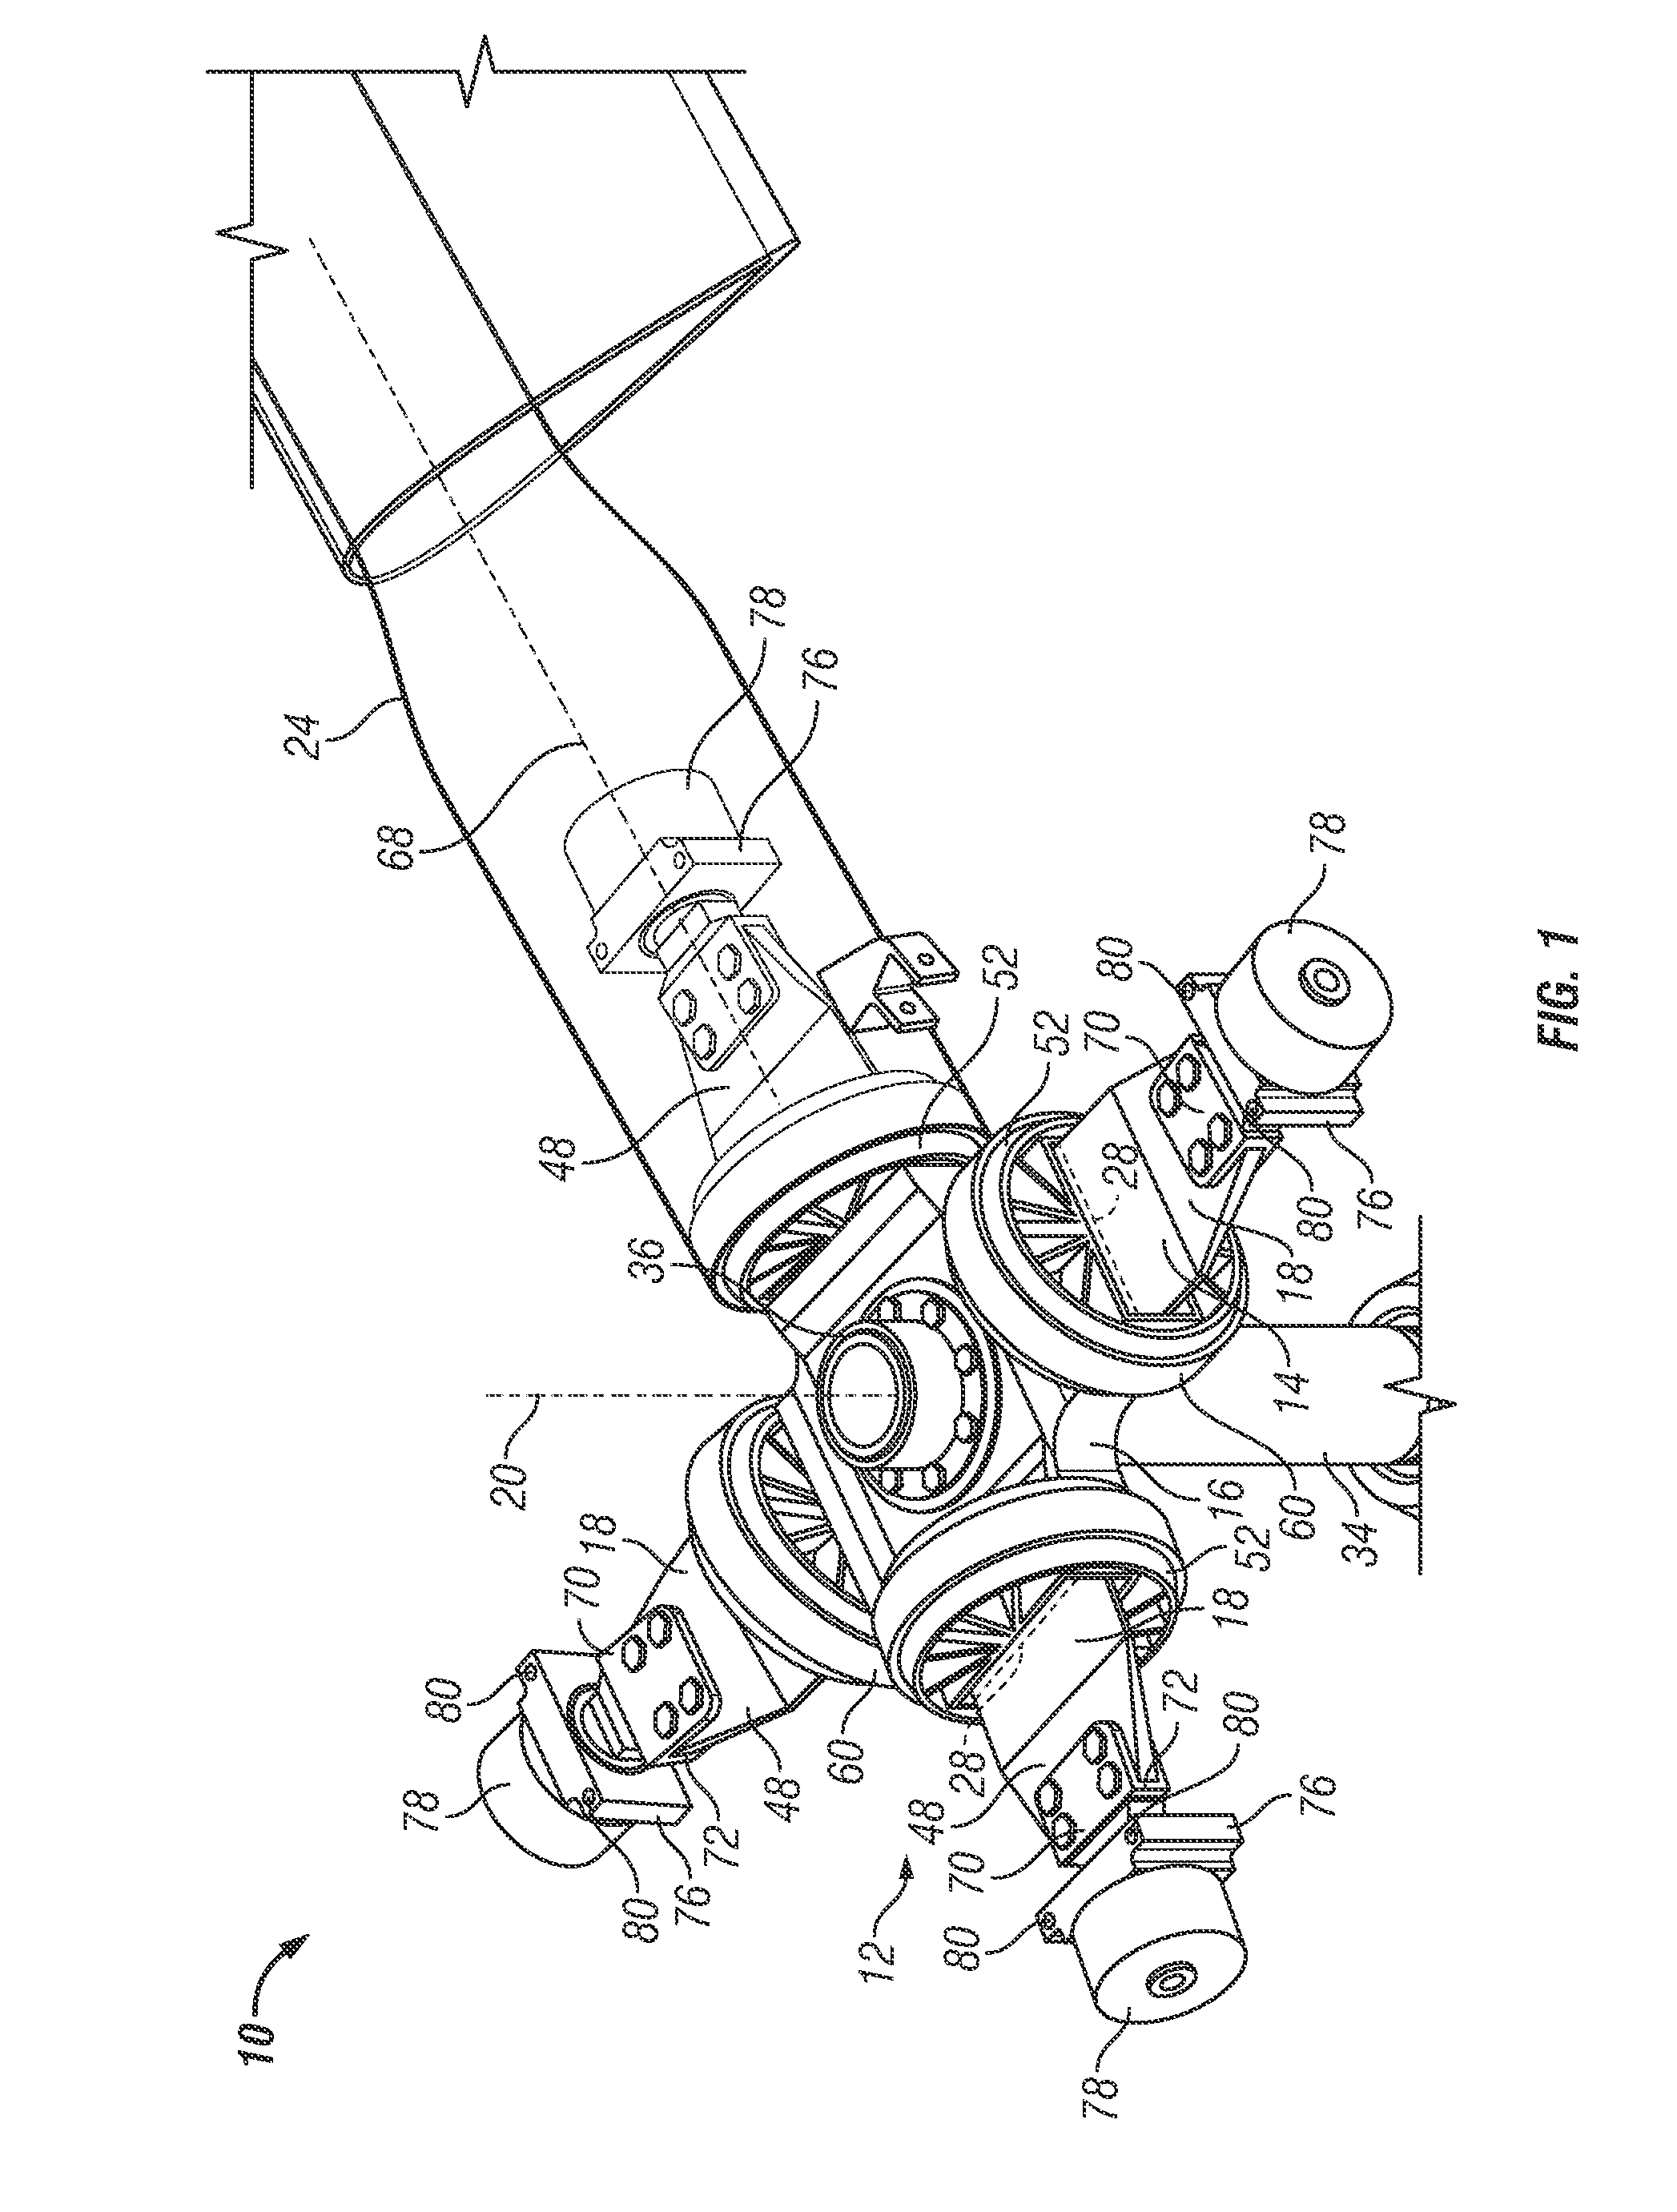 Low offset hingeless rotor with pitch change bearings